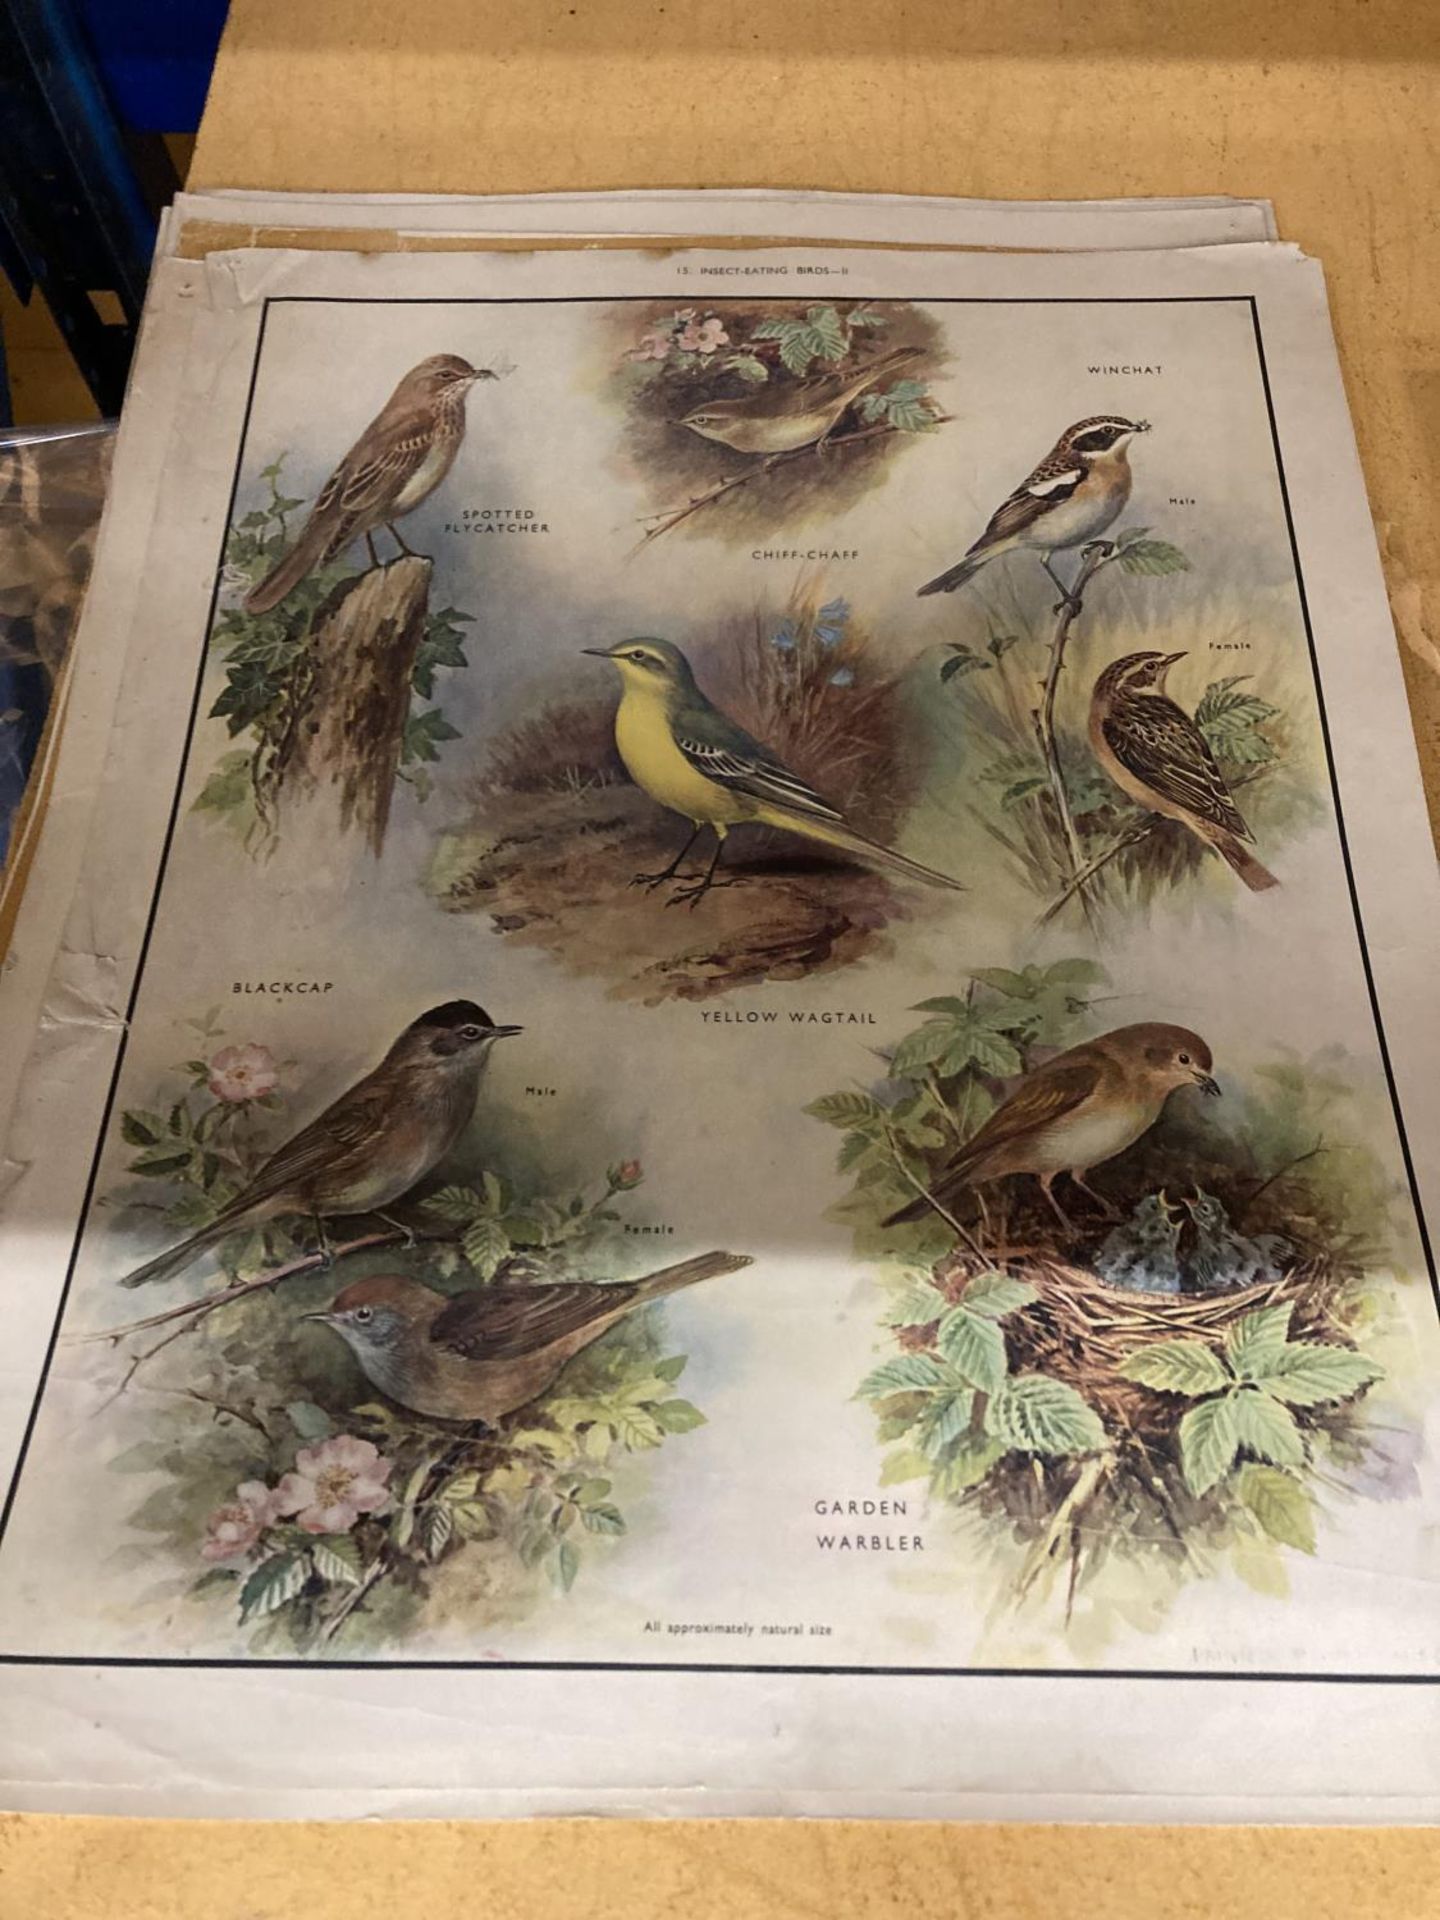 A COLLECTION OF LARGE VINTAGE PRINTS DEPICTING FLOWERS AND ANIMALS - 13 IN TOTAL - Image 2 of 4